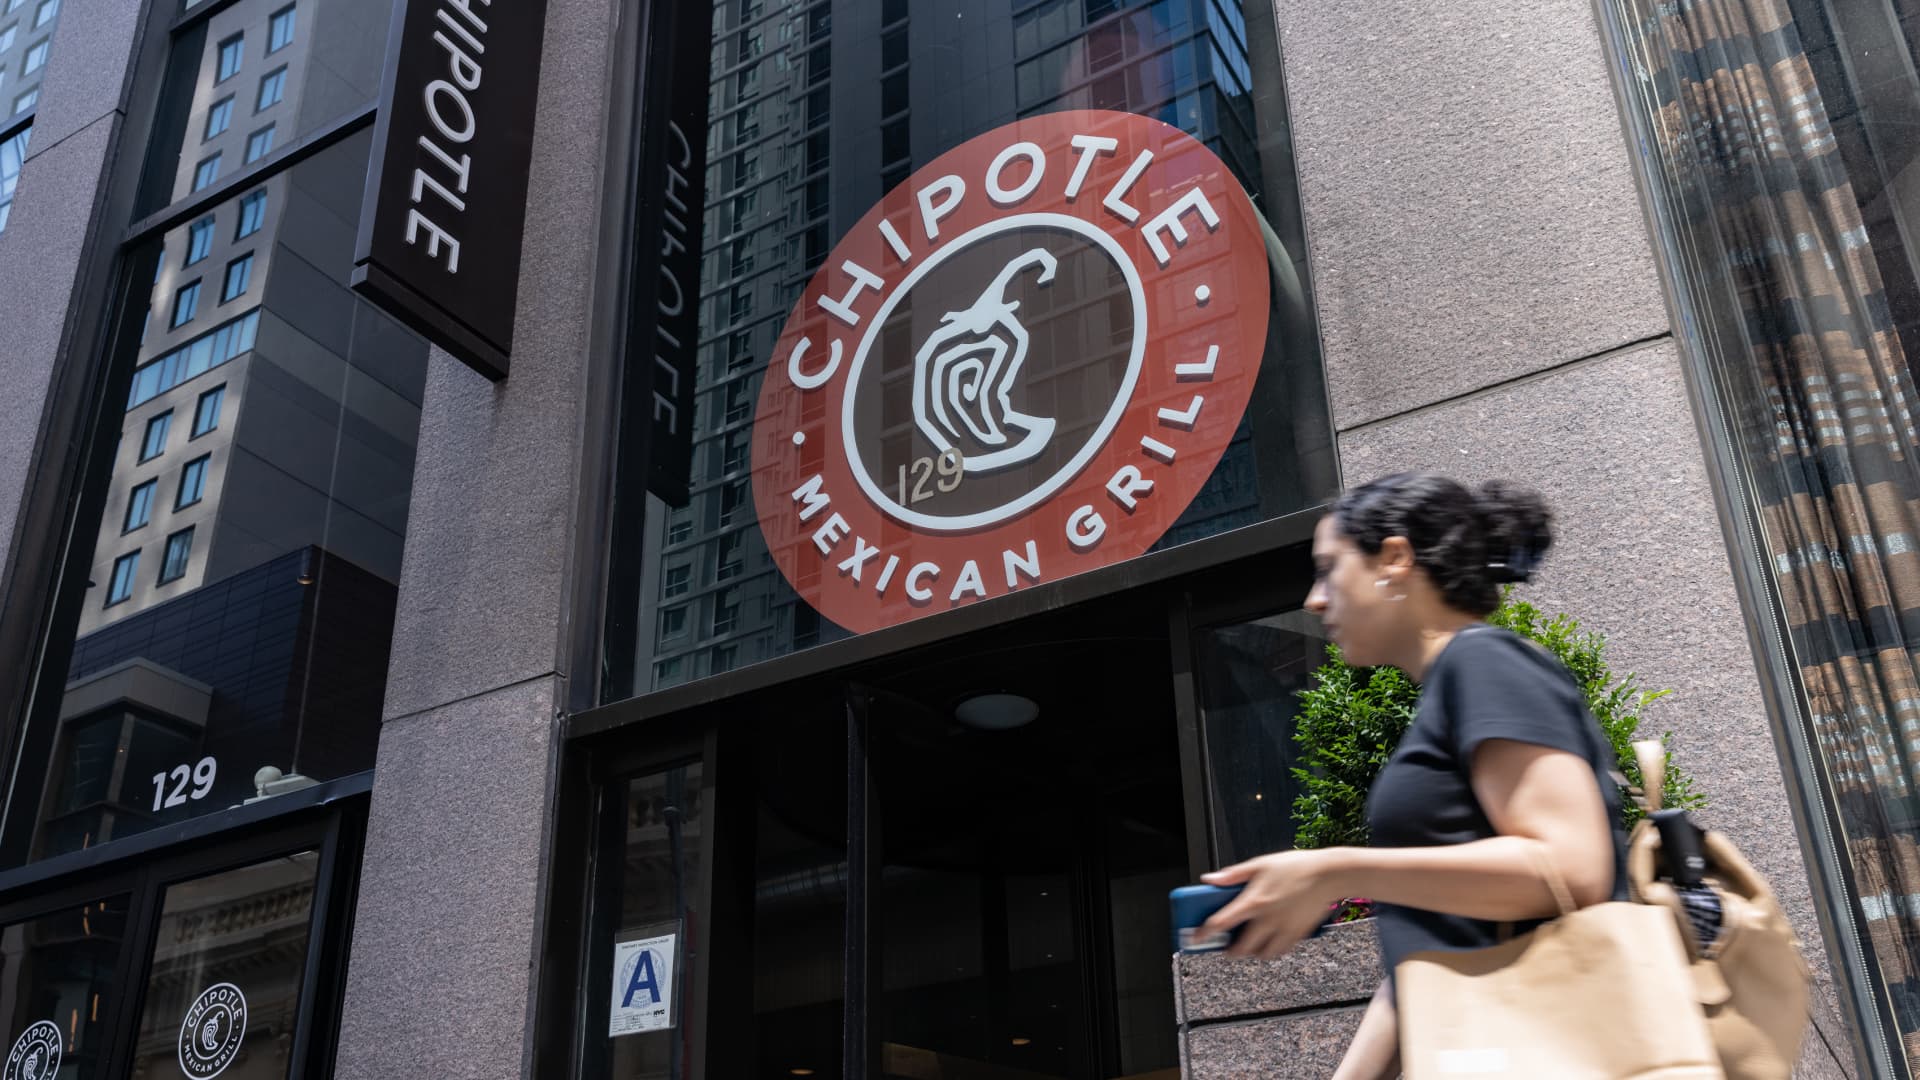 Chipotle shares slide as sales fall short of Wall Street's expectations